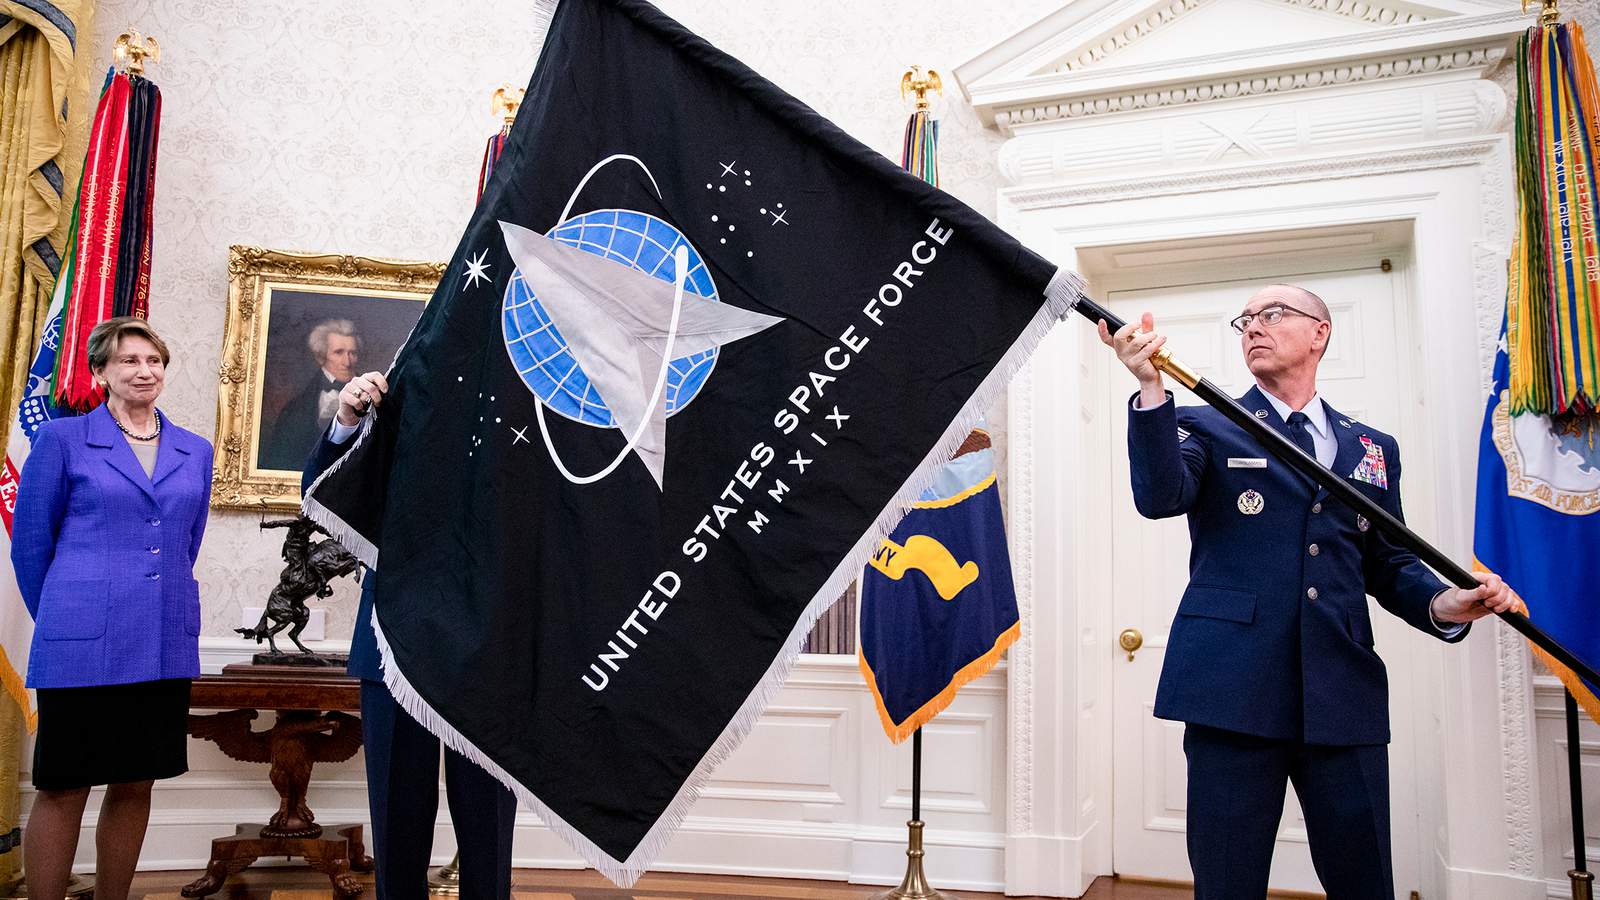 WATCH: White House holds celebration to mark Space Force’s first anniversary